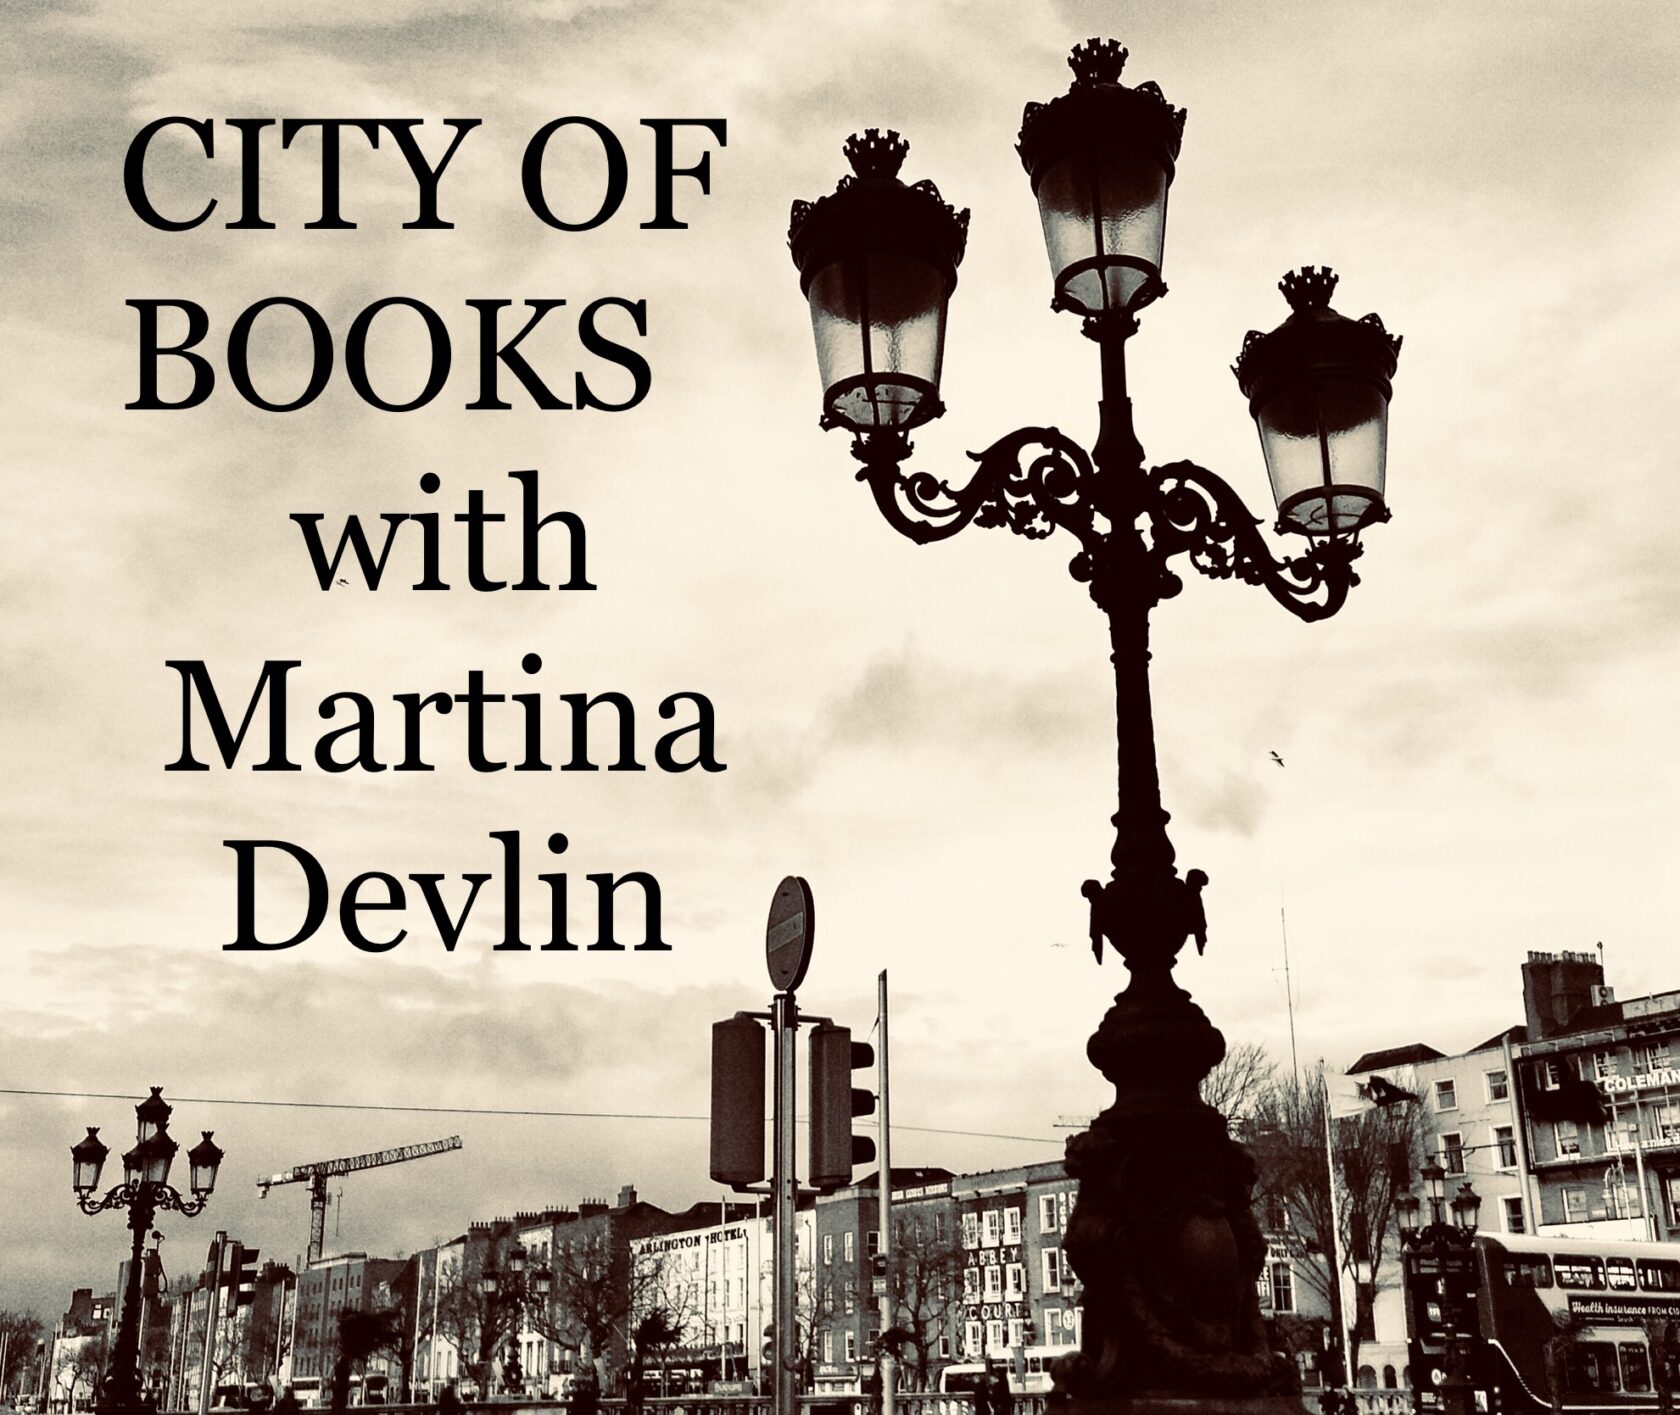 Authors Martina Devlin & Mary Costello Podcast from the tower